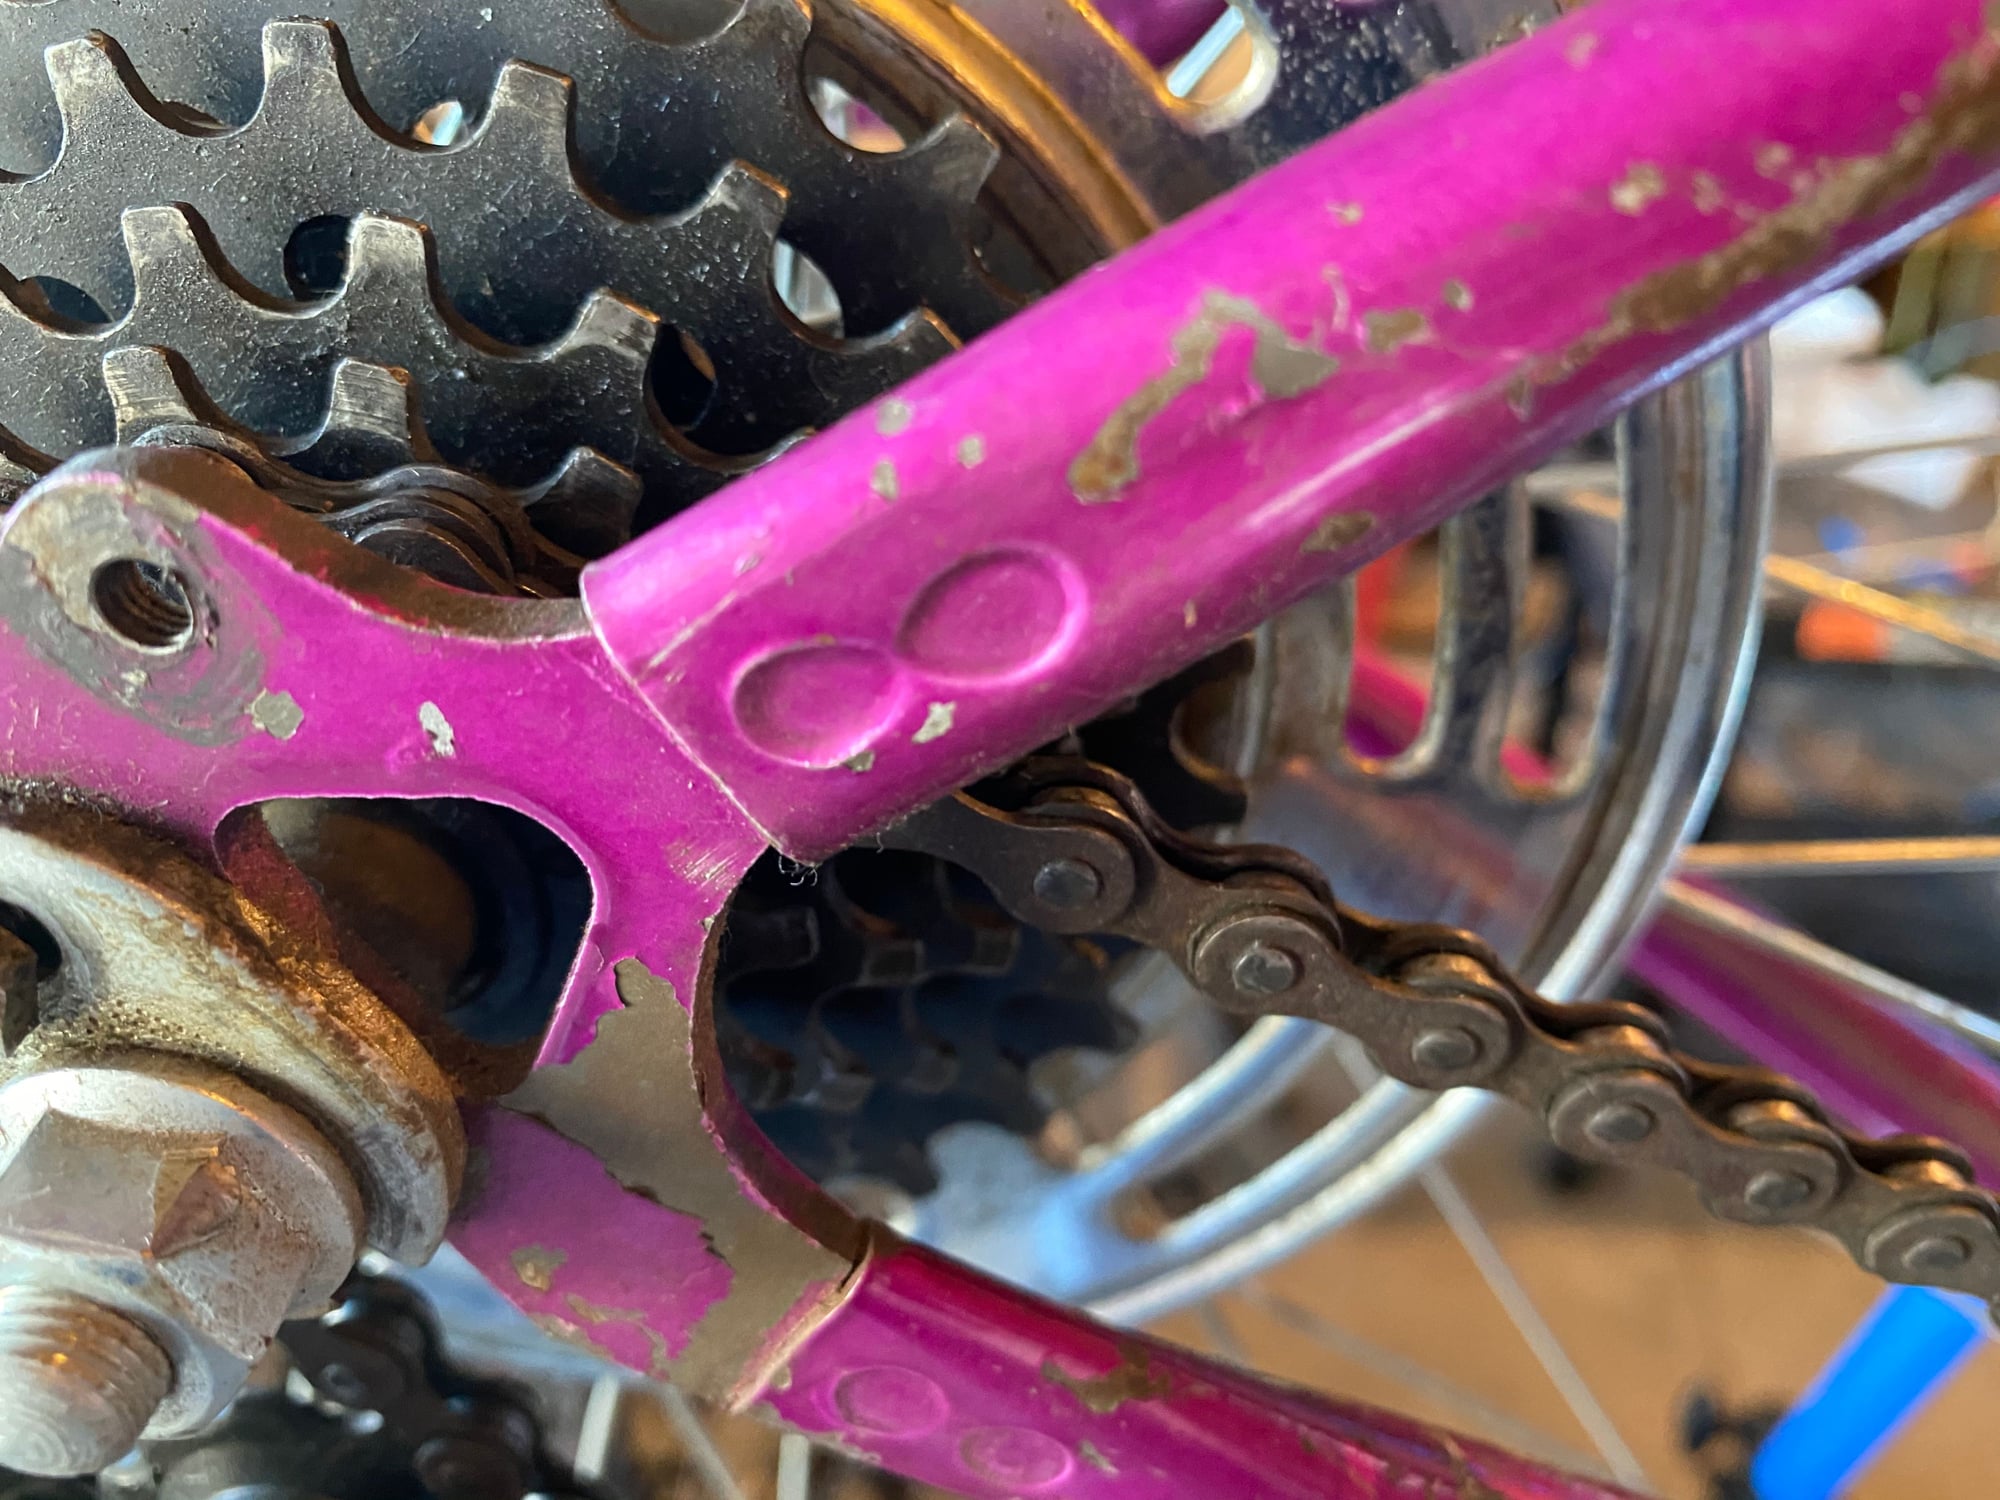 Bike Forums - What is this brake called?